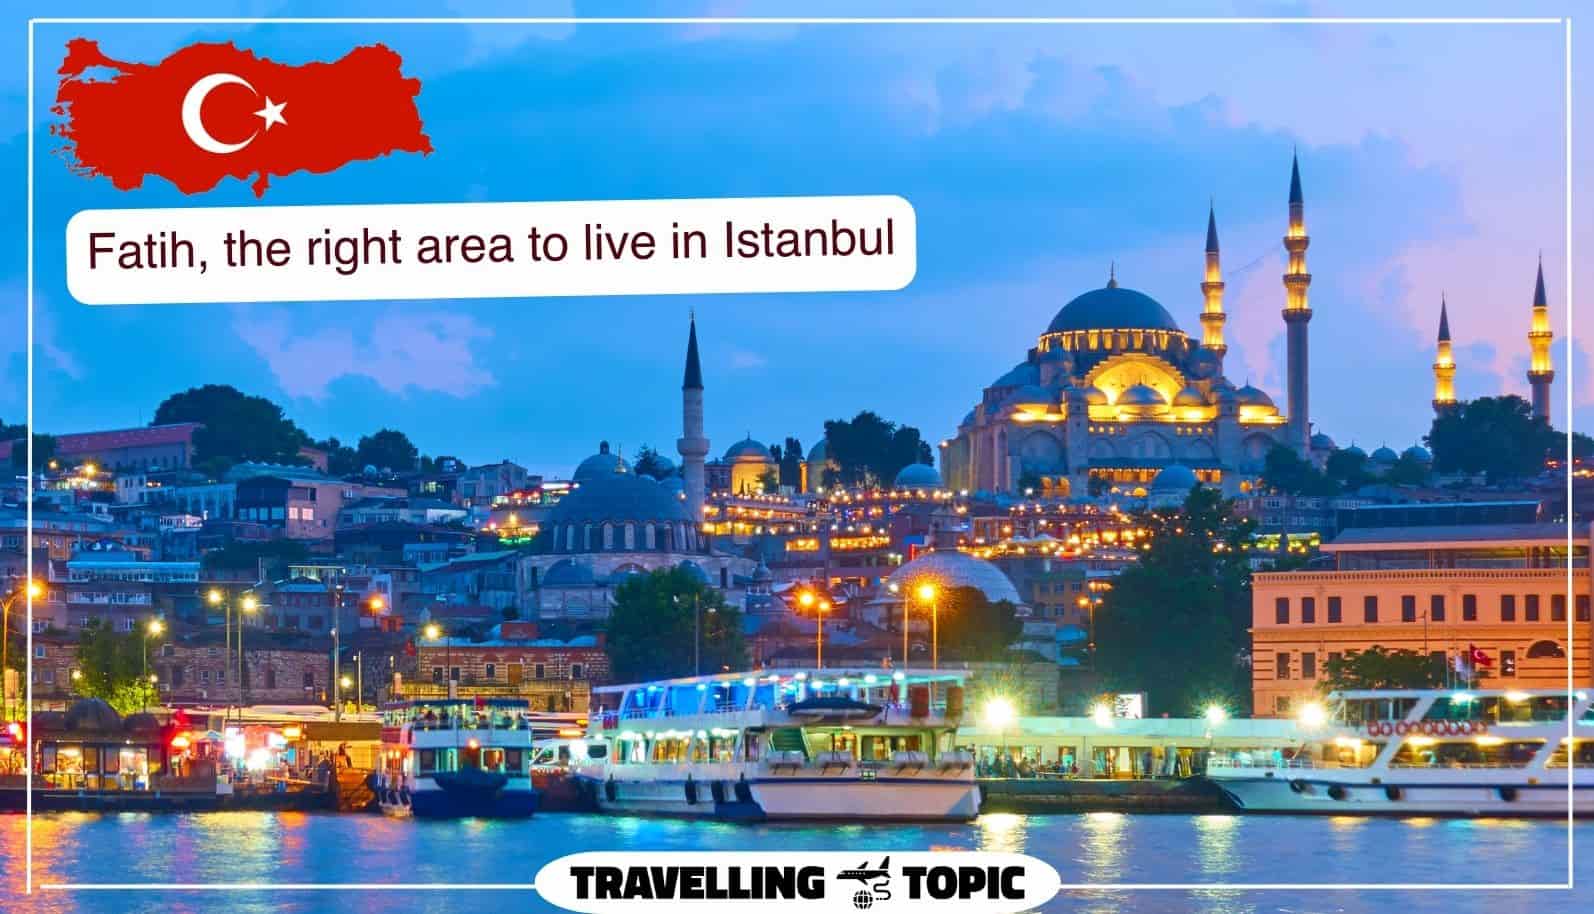 Fatih, the right area to live in Istanbul